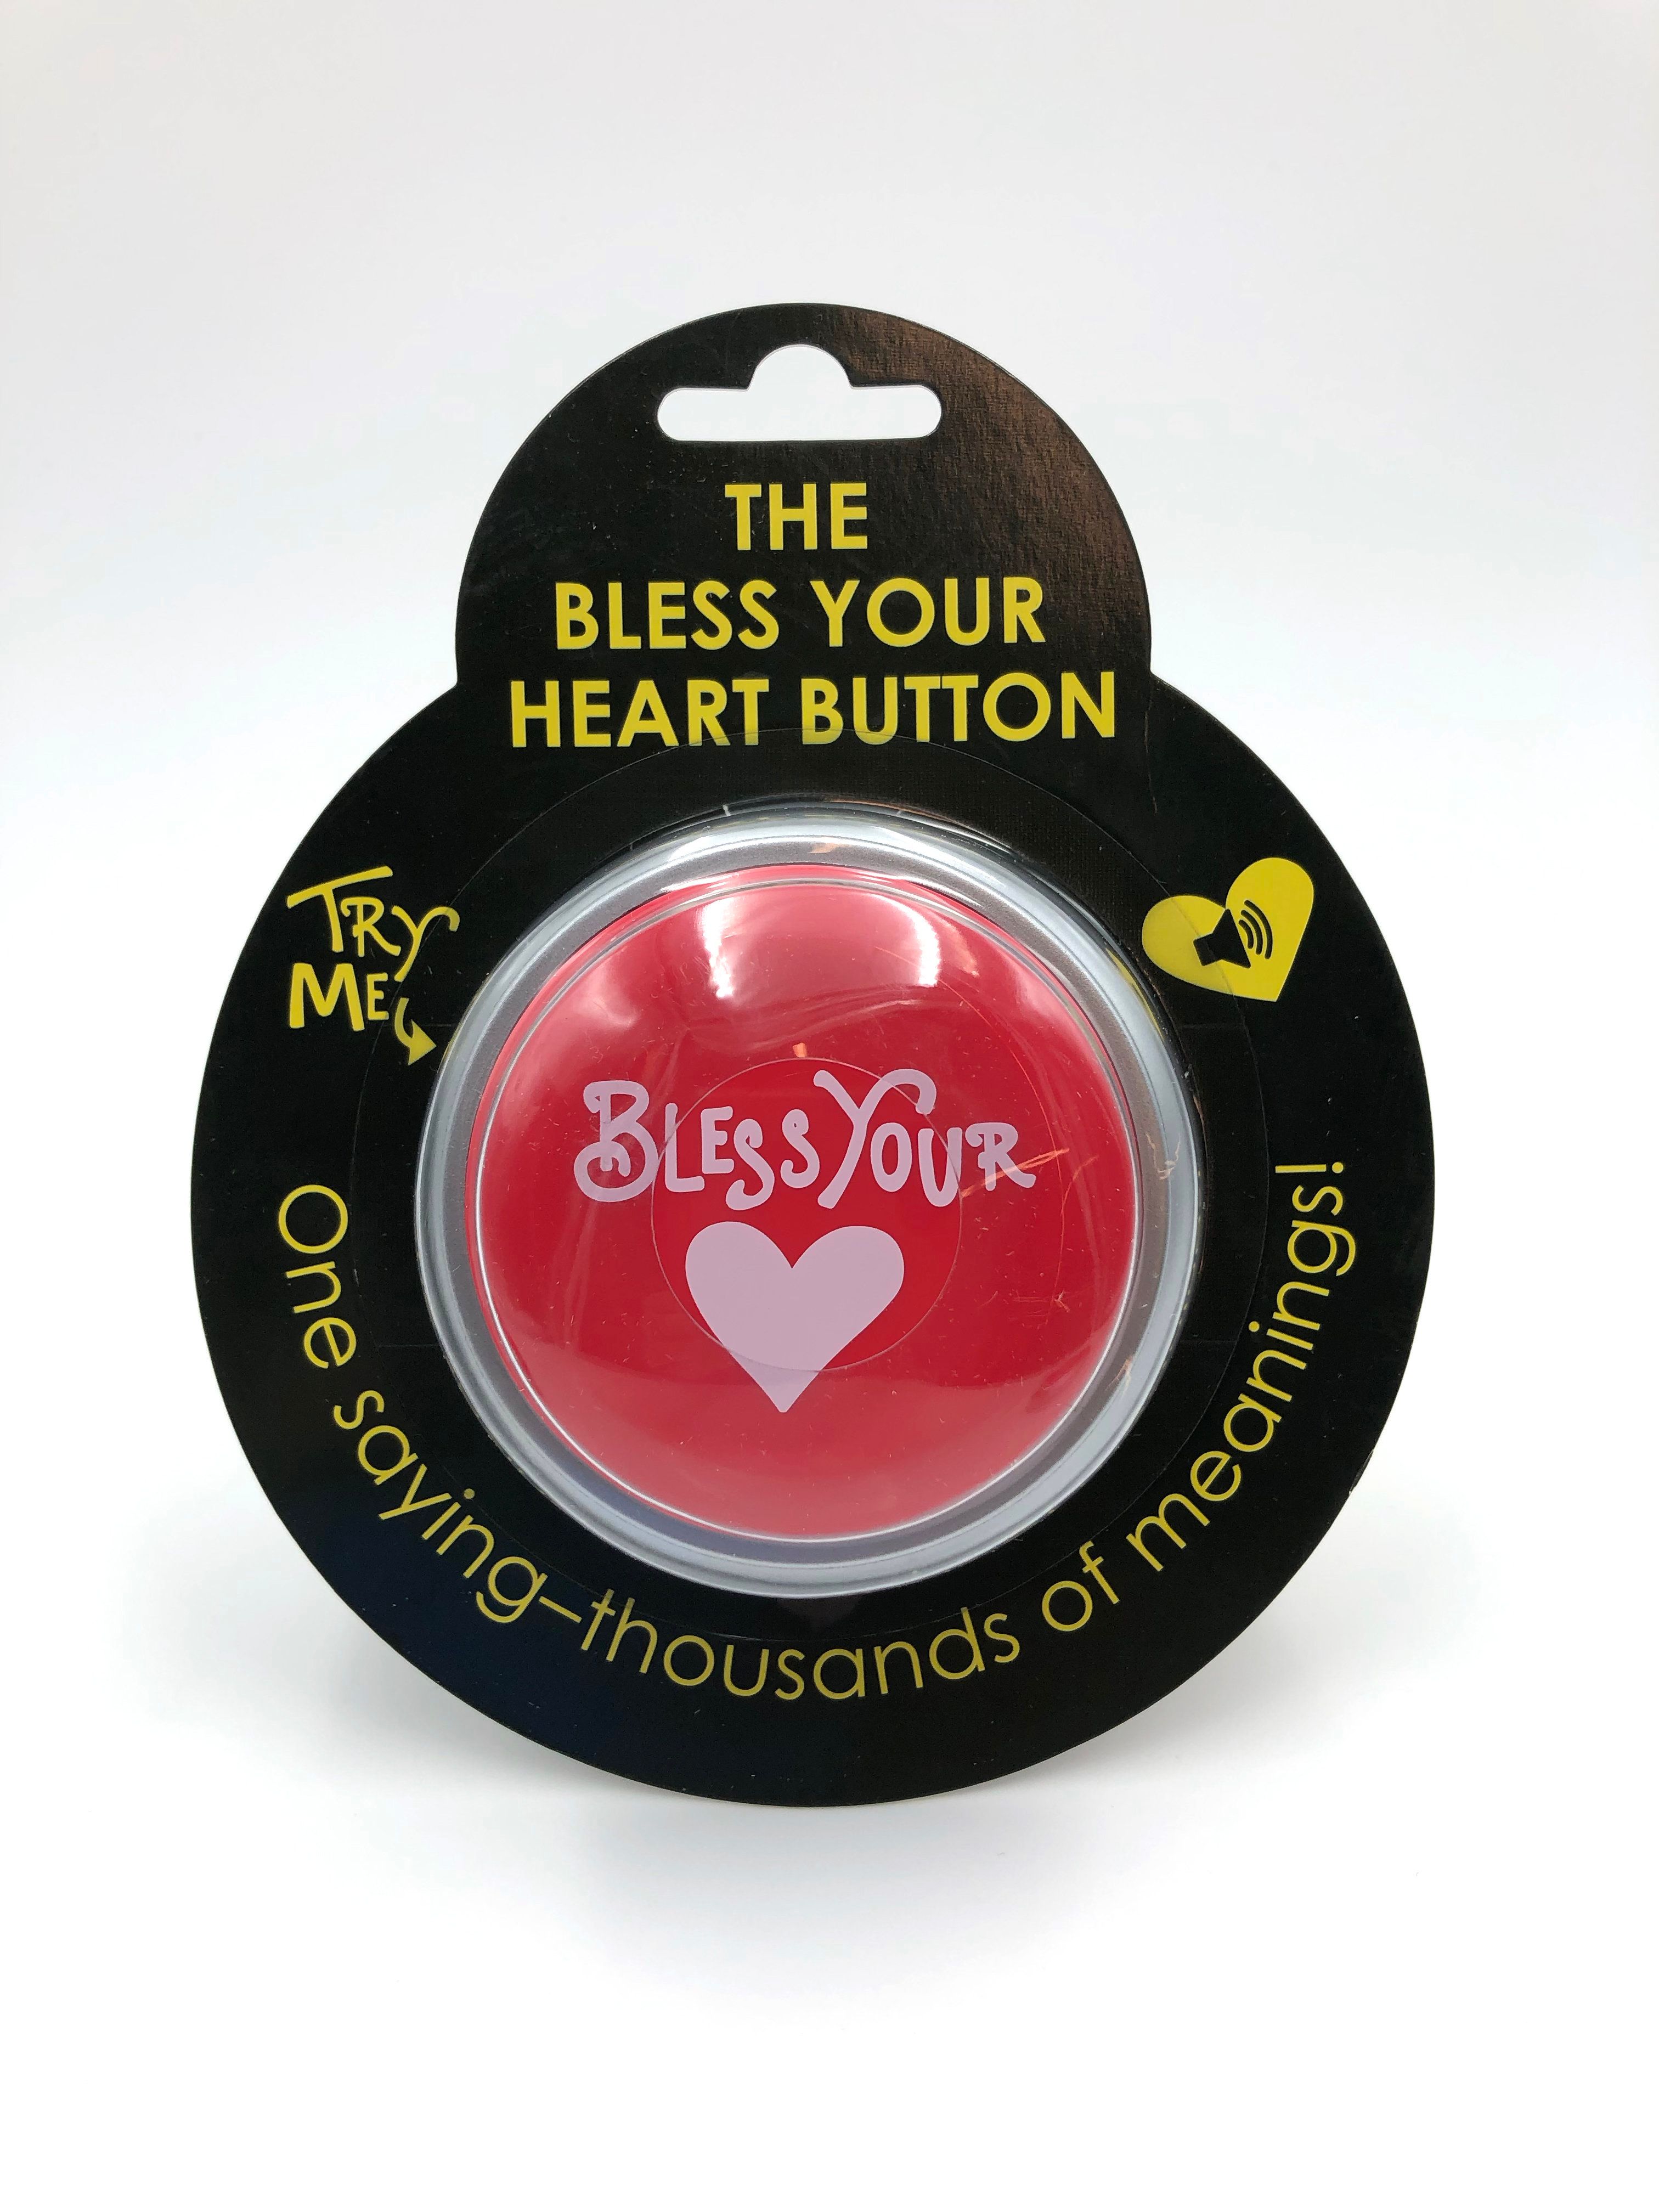 Here's how to buy your own 'Bless your heart' button - It's a Southern Thing